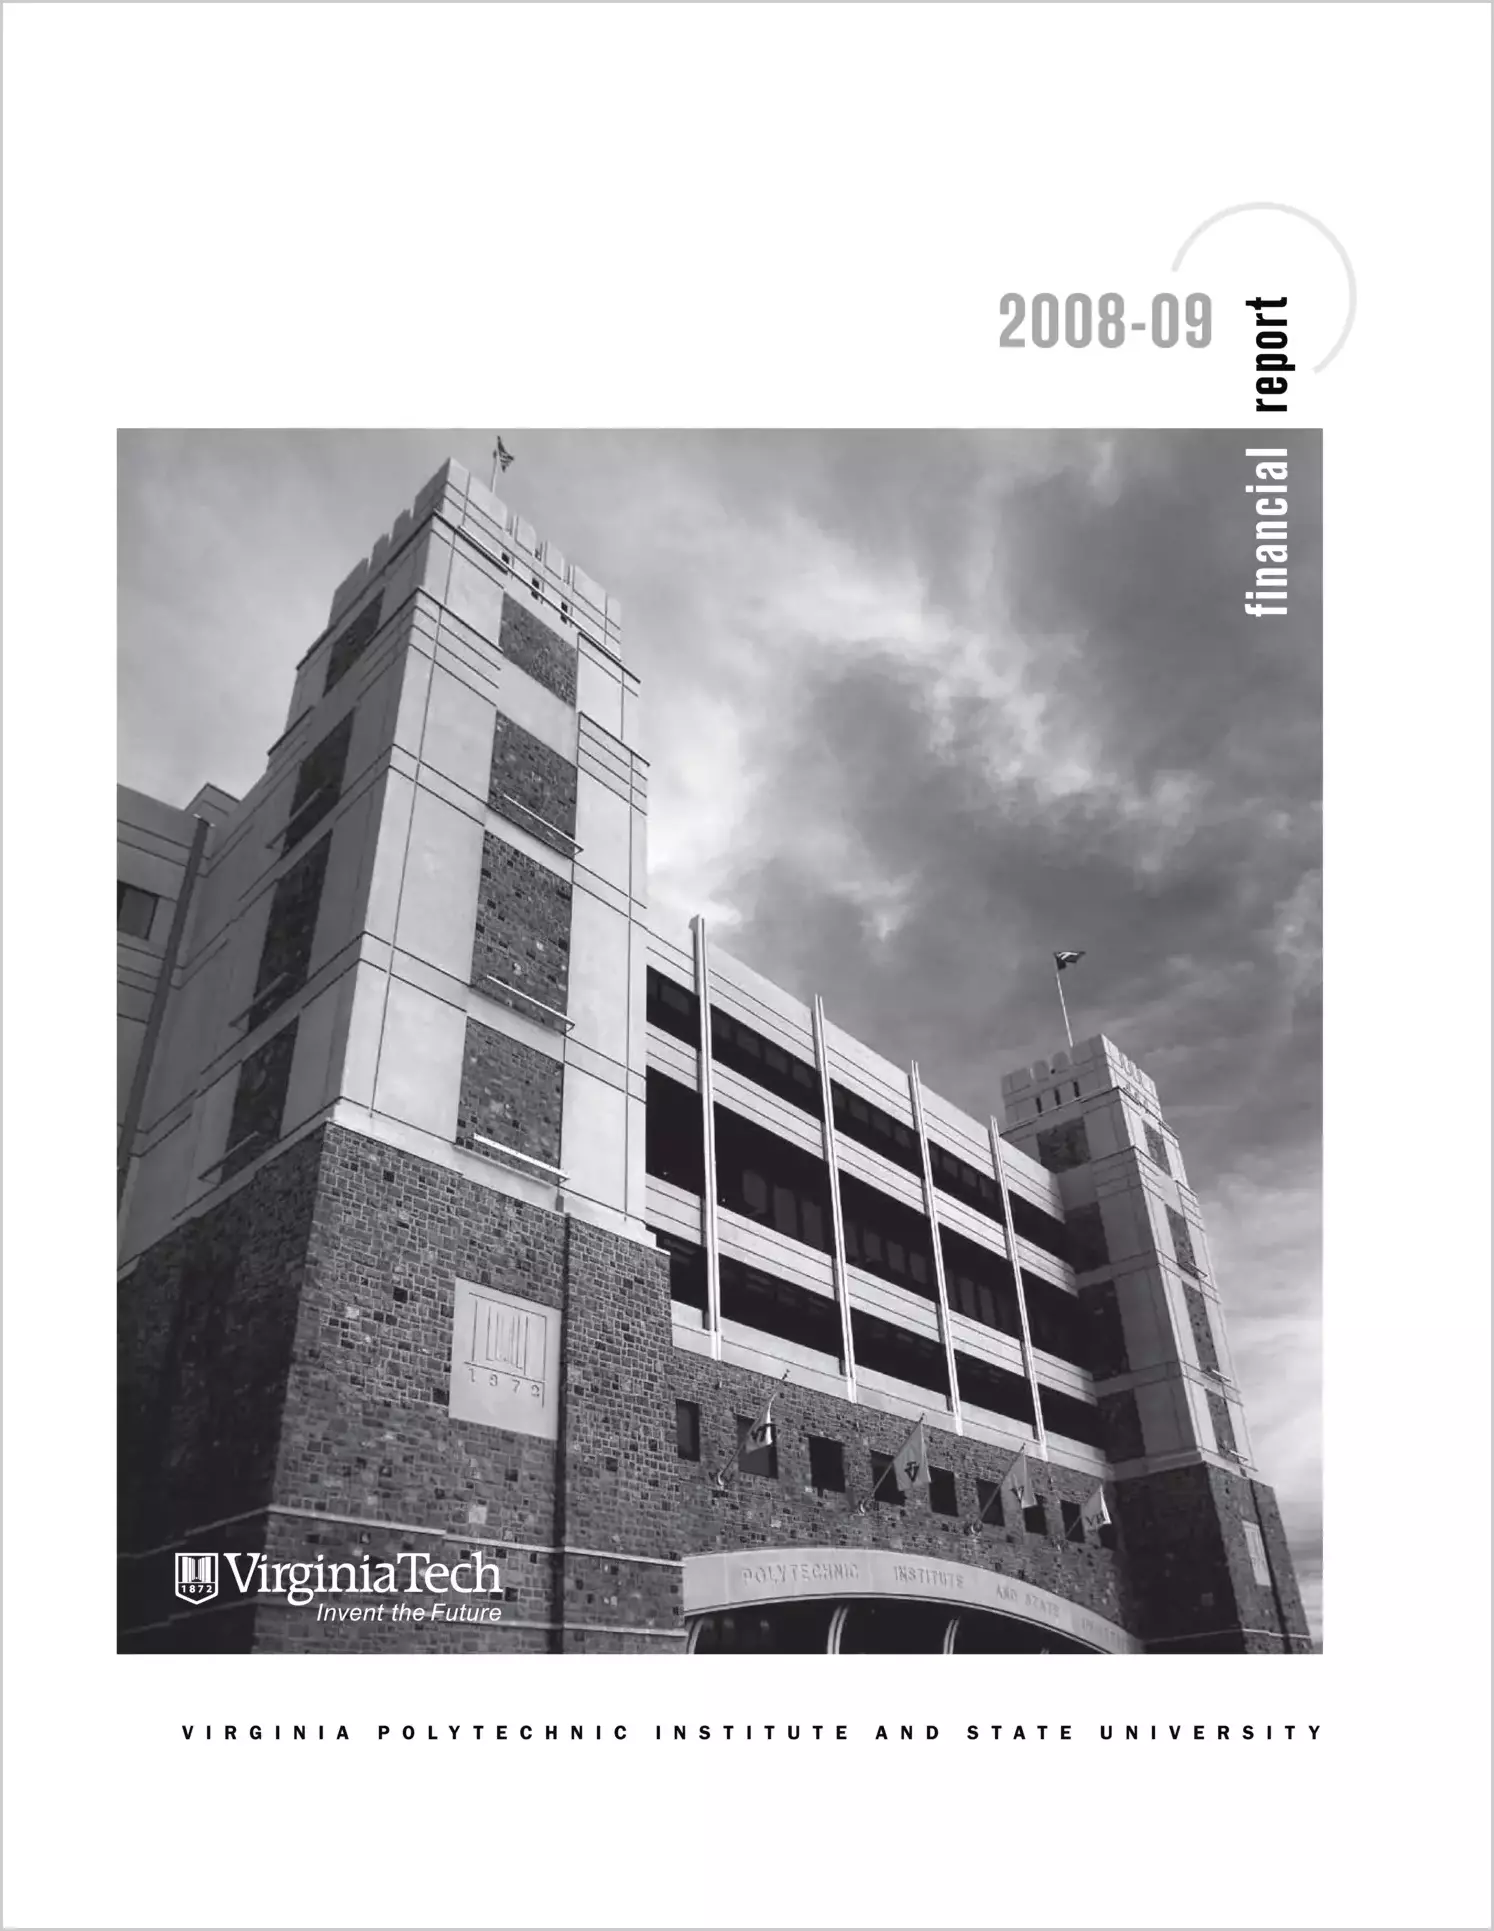 Virginia Polytechnic Institute and State University - Financial Report 2009